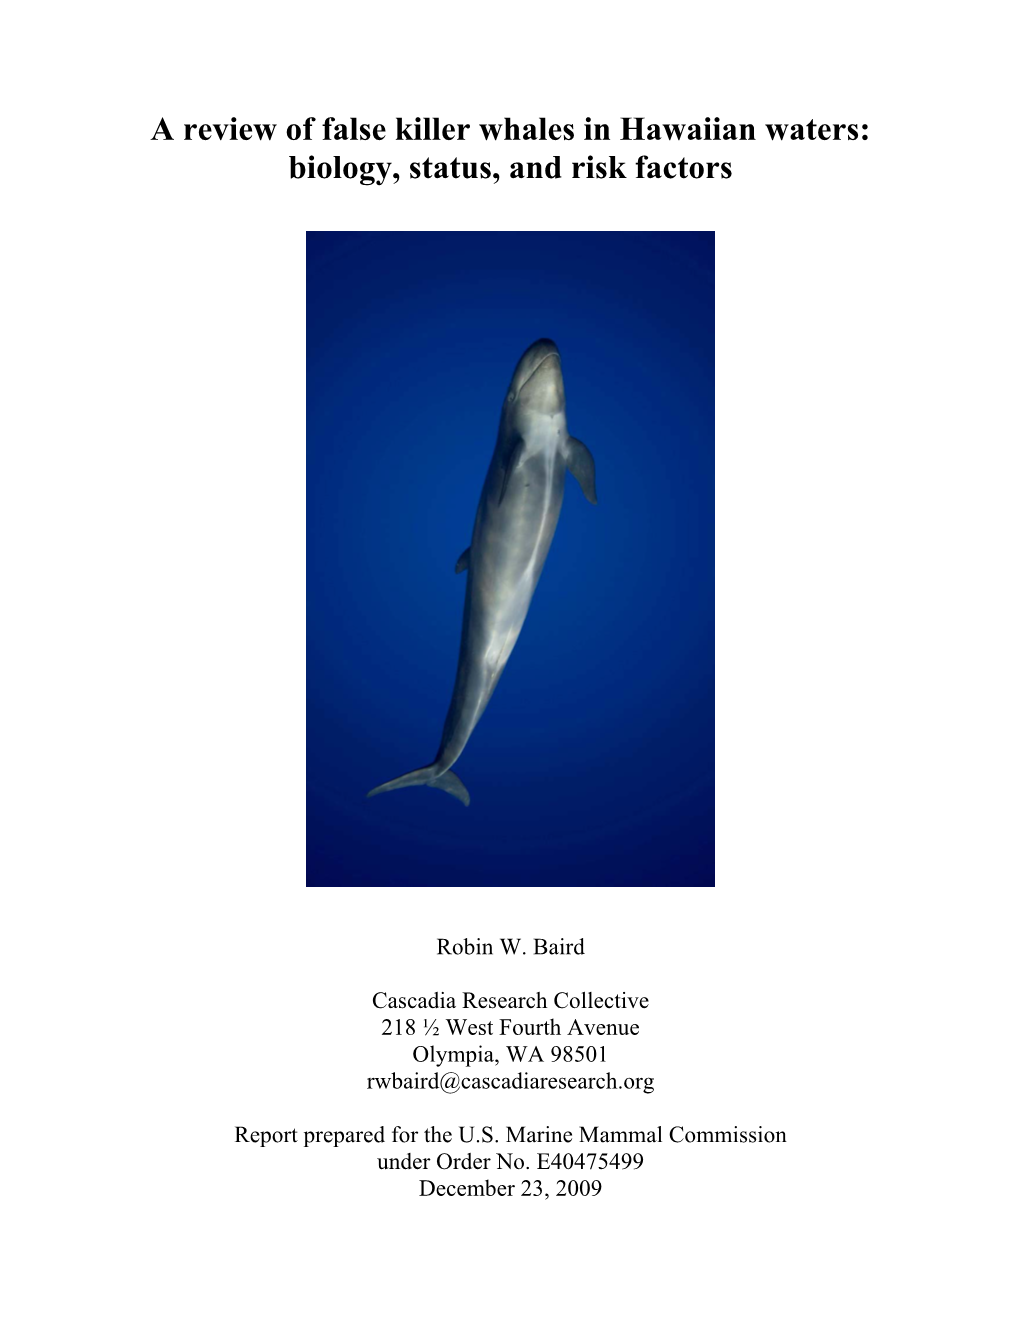 A Review of False Killer Whales in Hawaiian Waters: Biology, Status, and Risk Factors